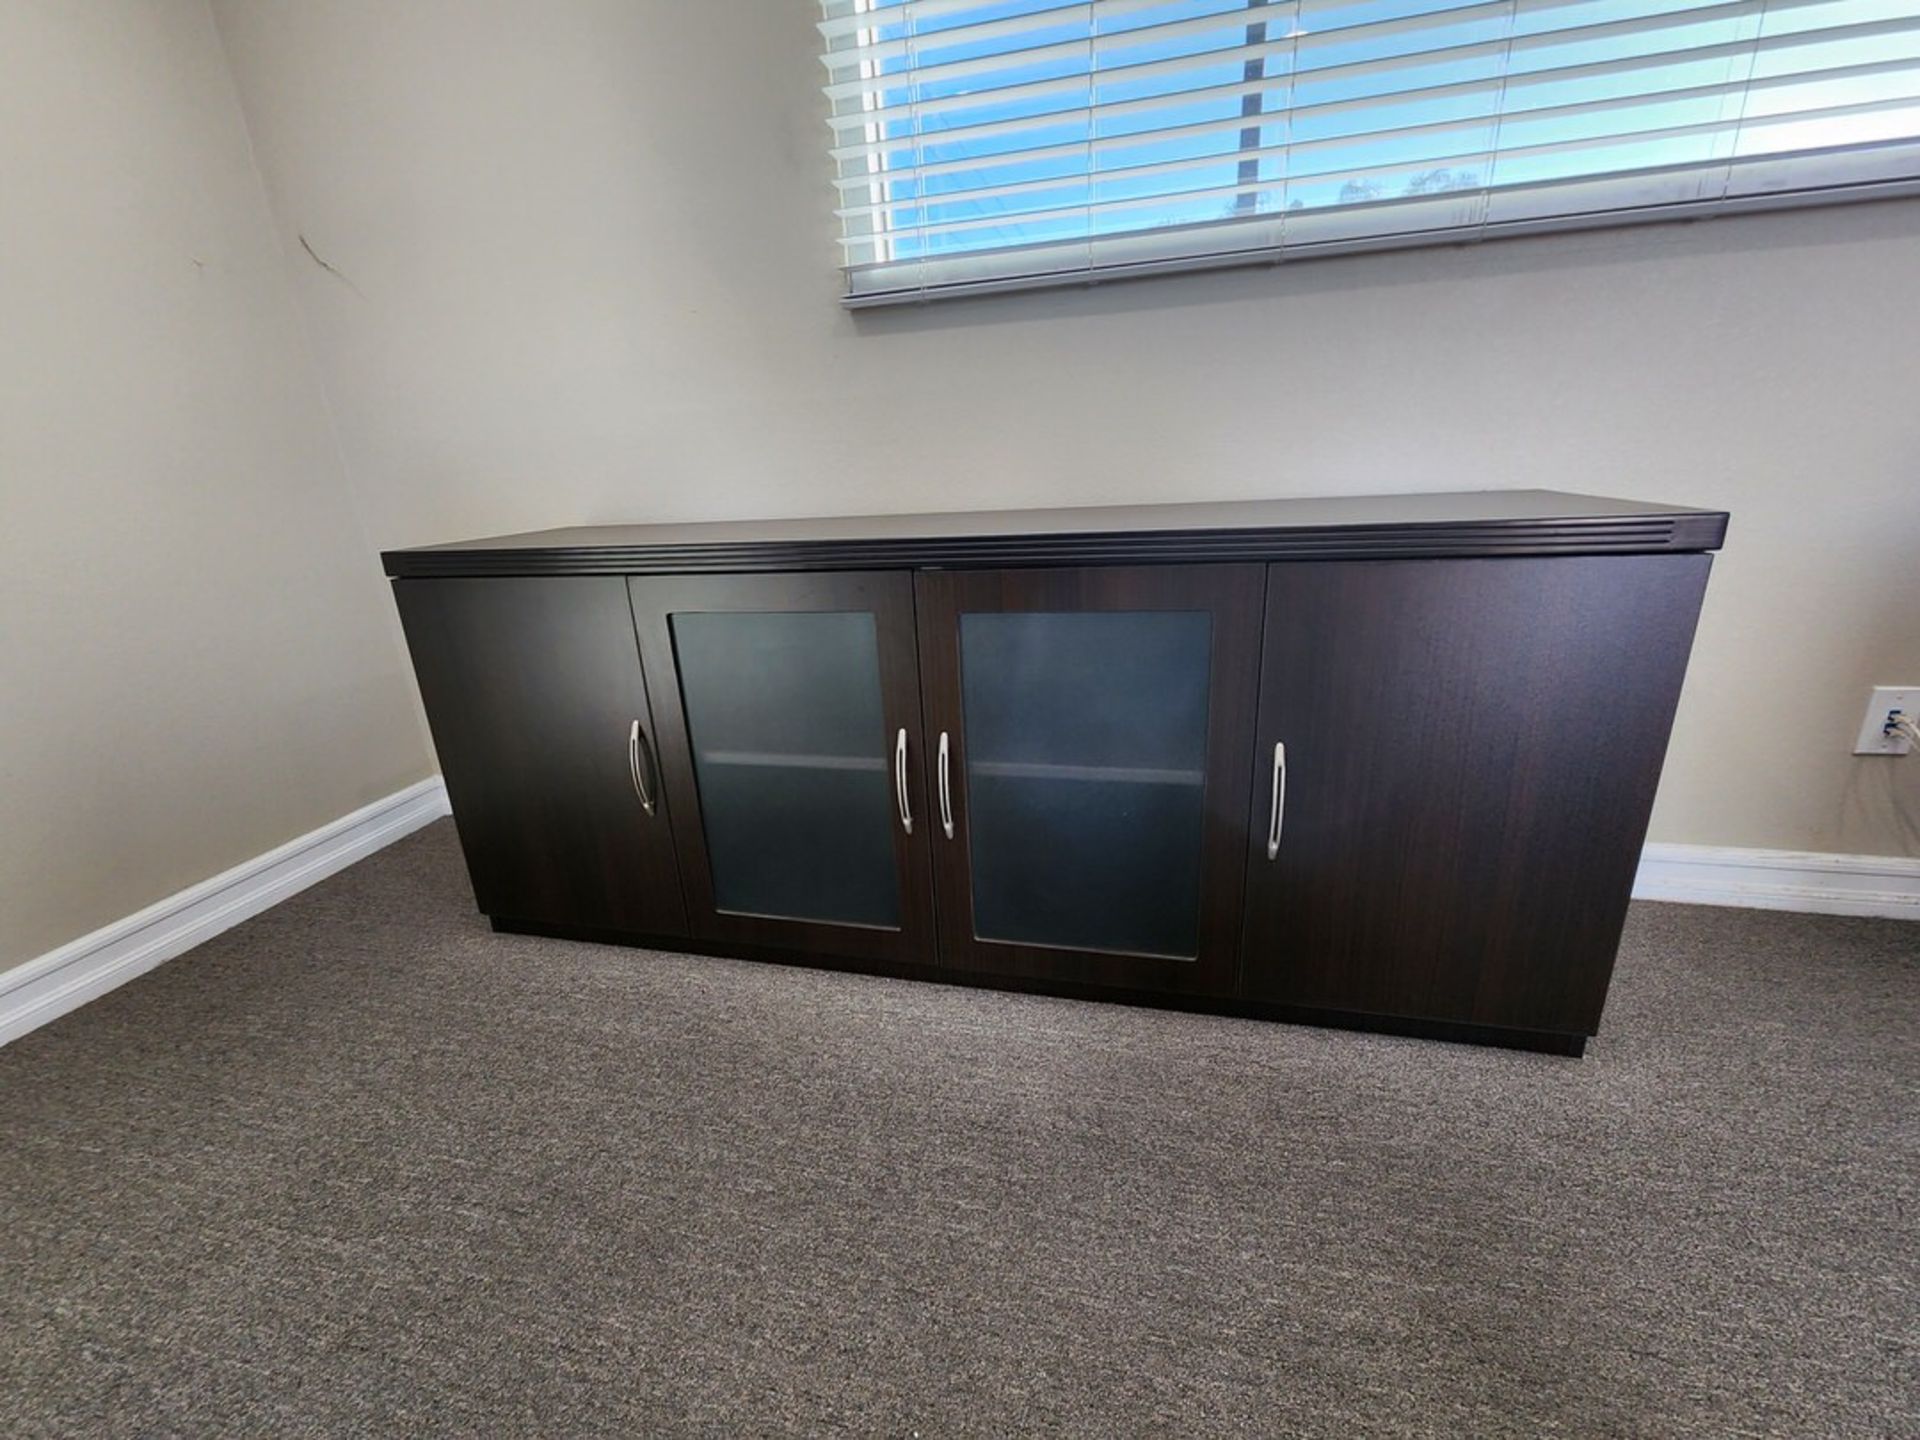 Office Contents Conference Table, L-Shape Desk, Credenza, Horizontal 2-Drawer File Cabinet, - Image 4 of 11